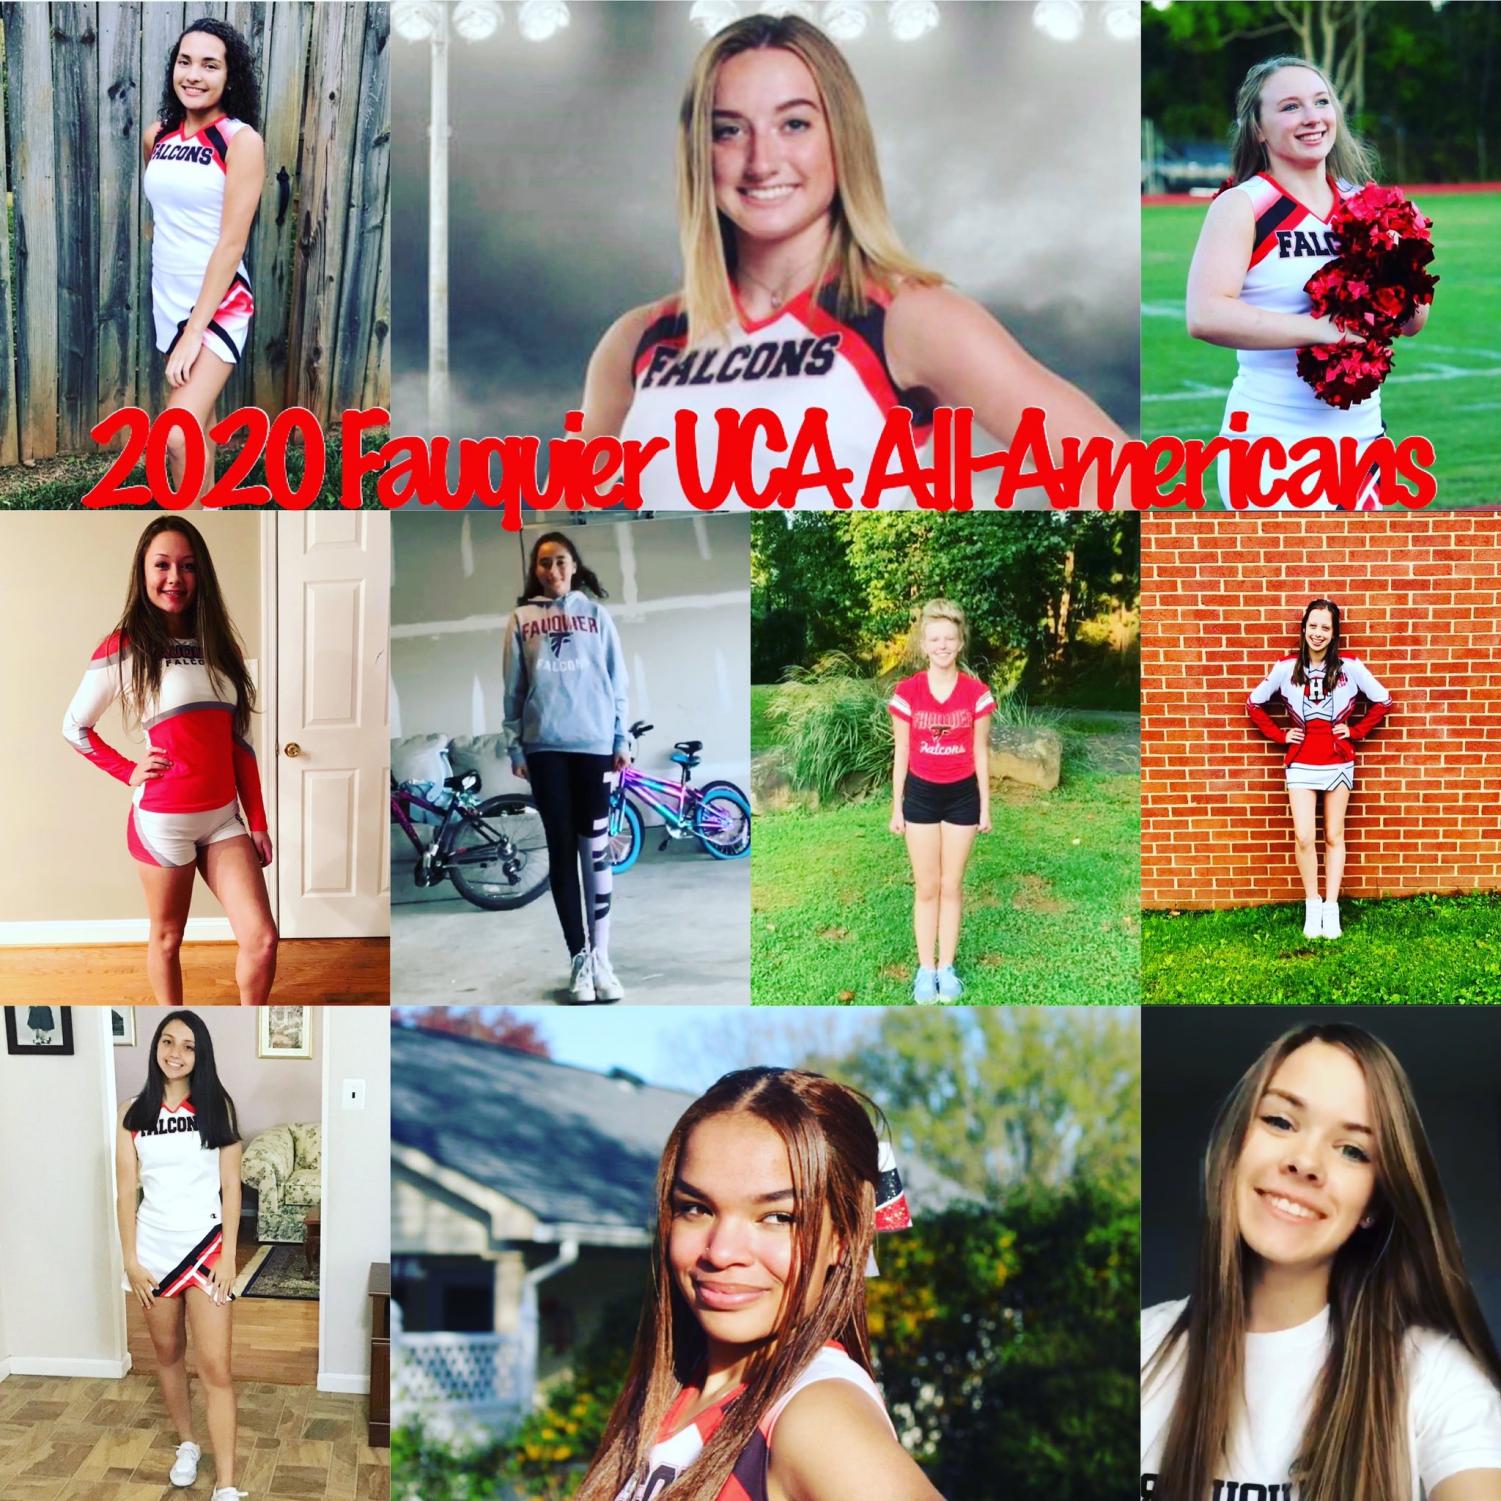 The chosen 10 FHS cheerleaders qualify for the UCA All American team